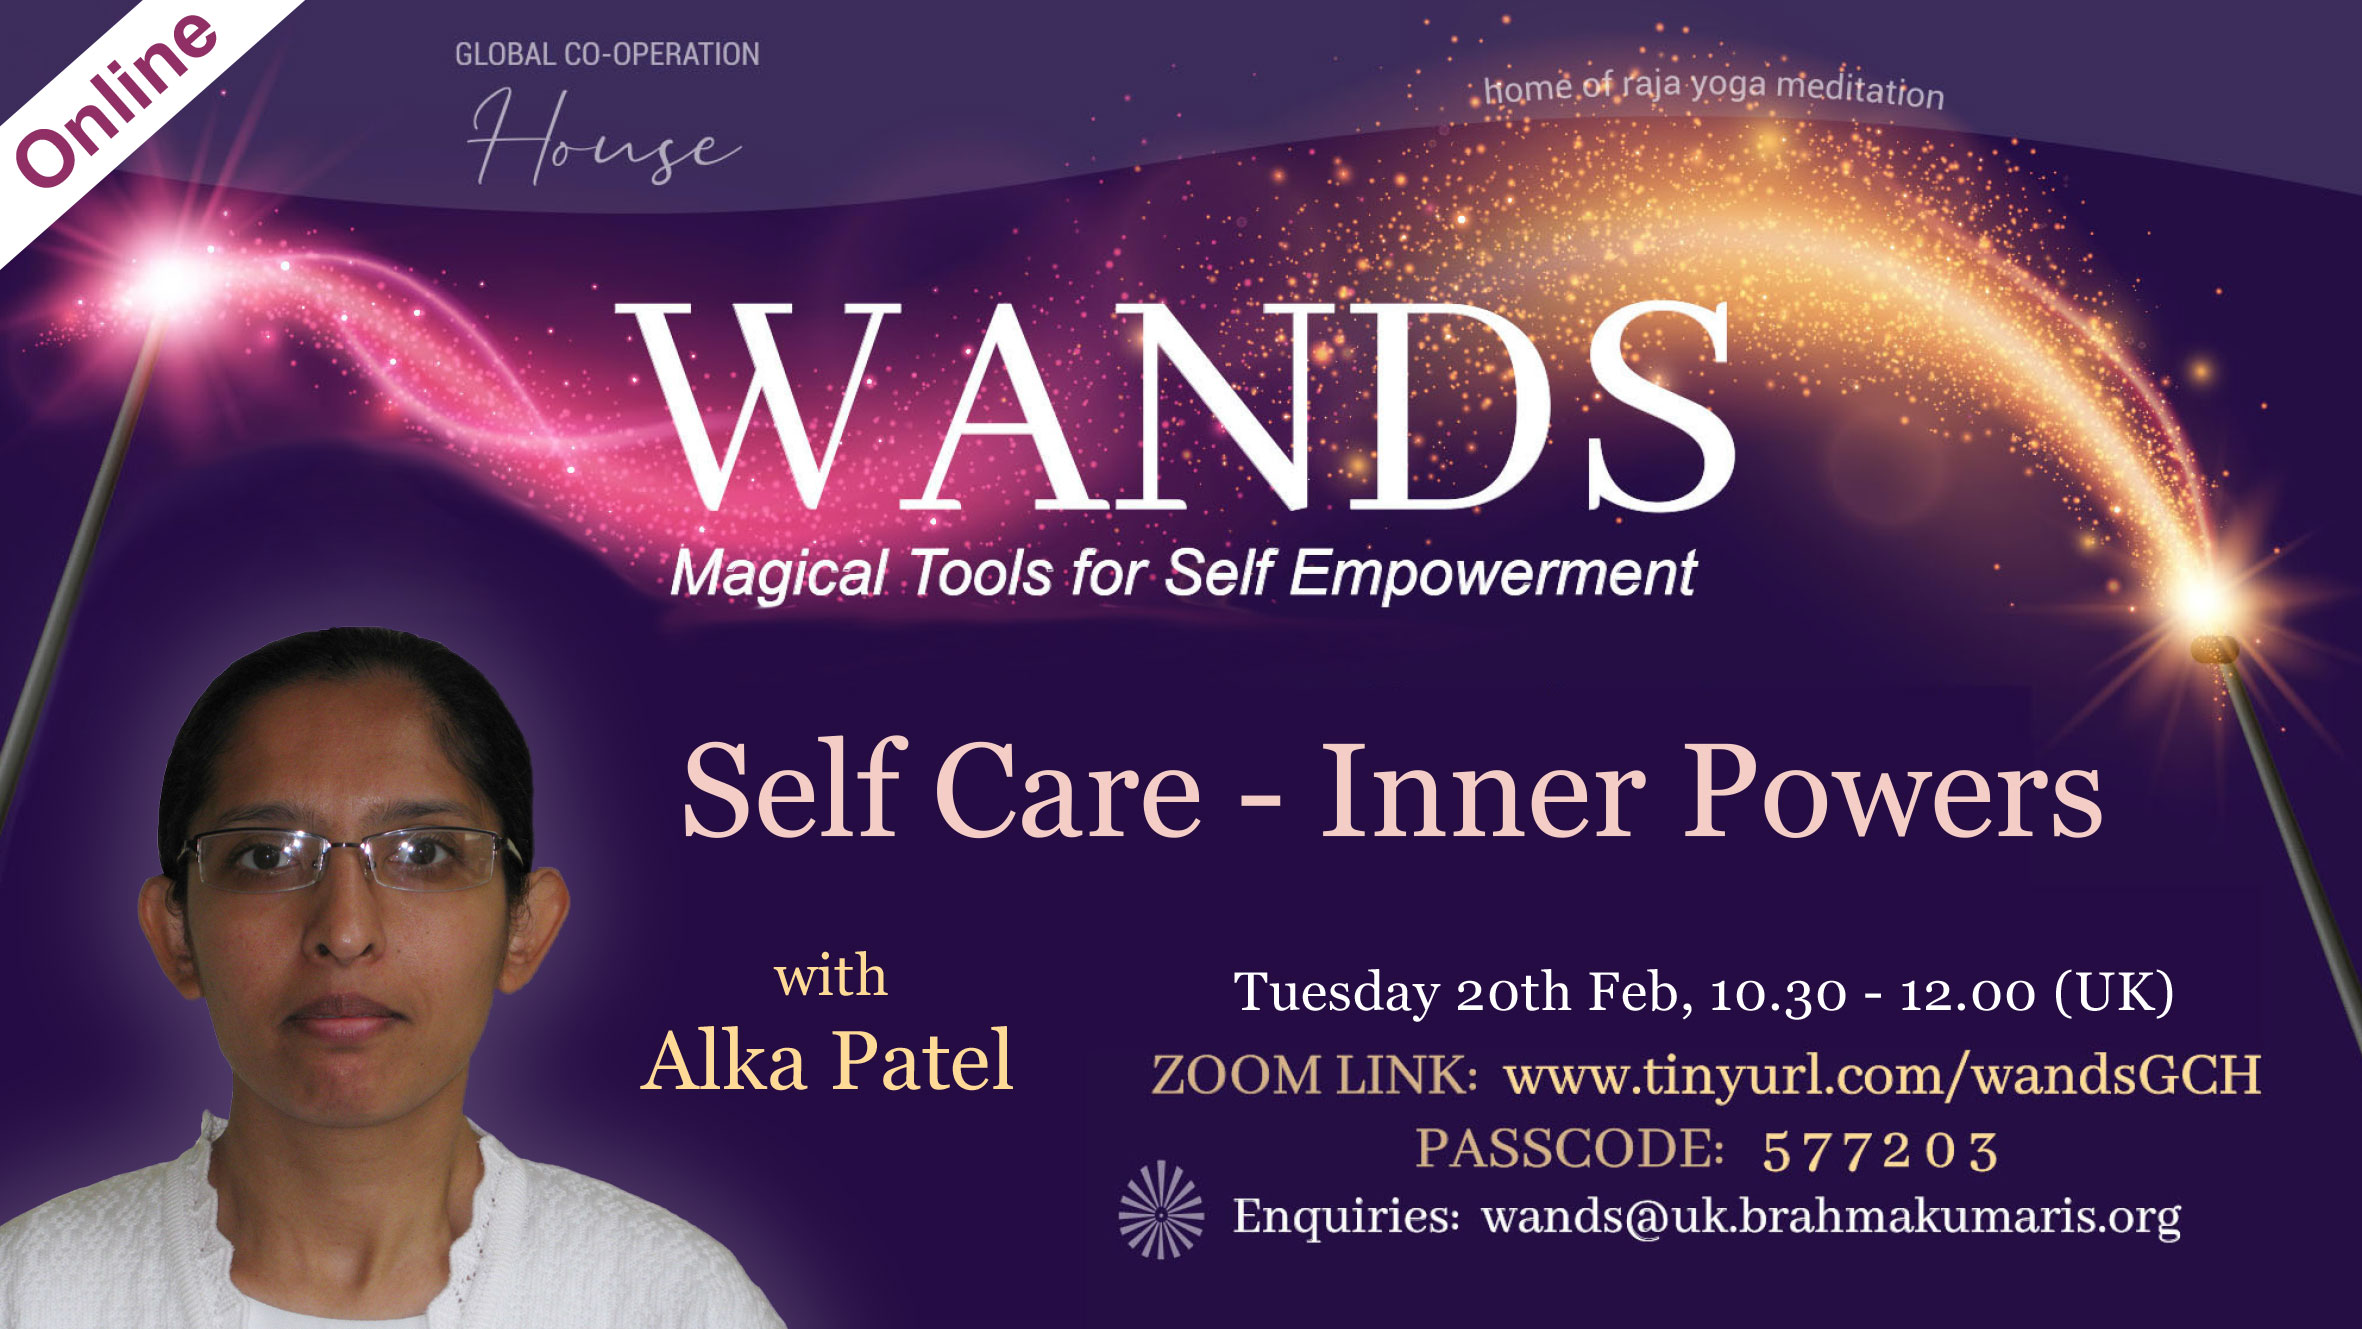 WANDS - Magical Tools for Self Empowerment